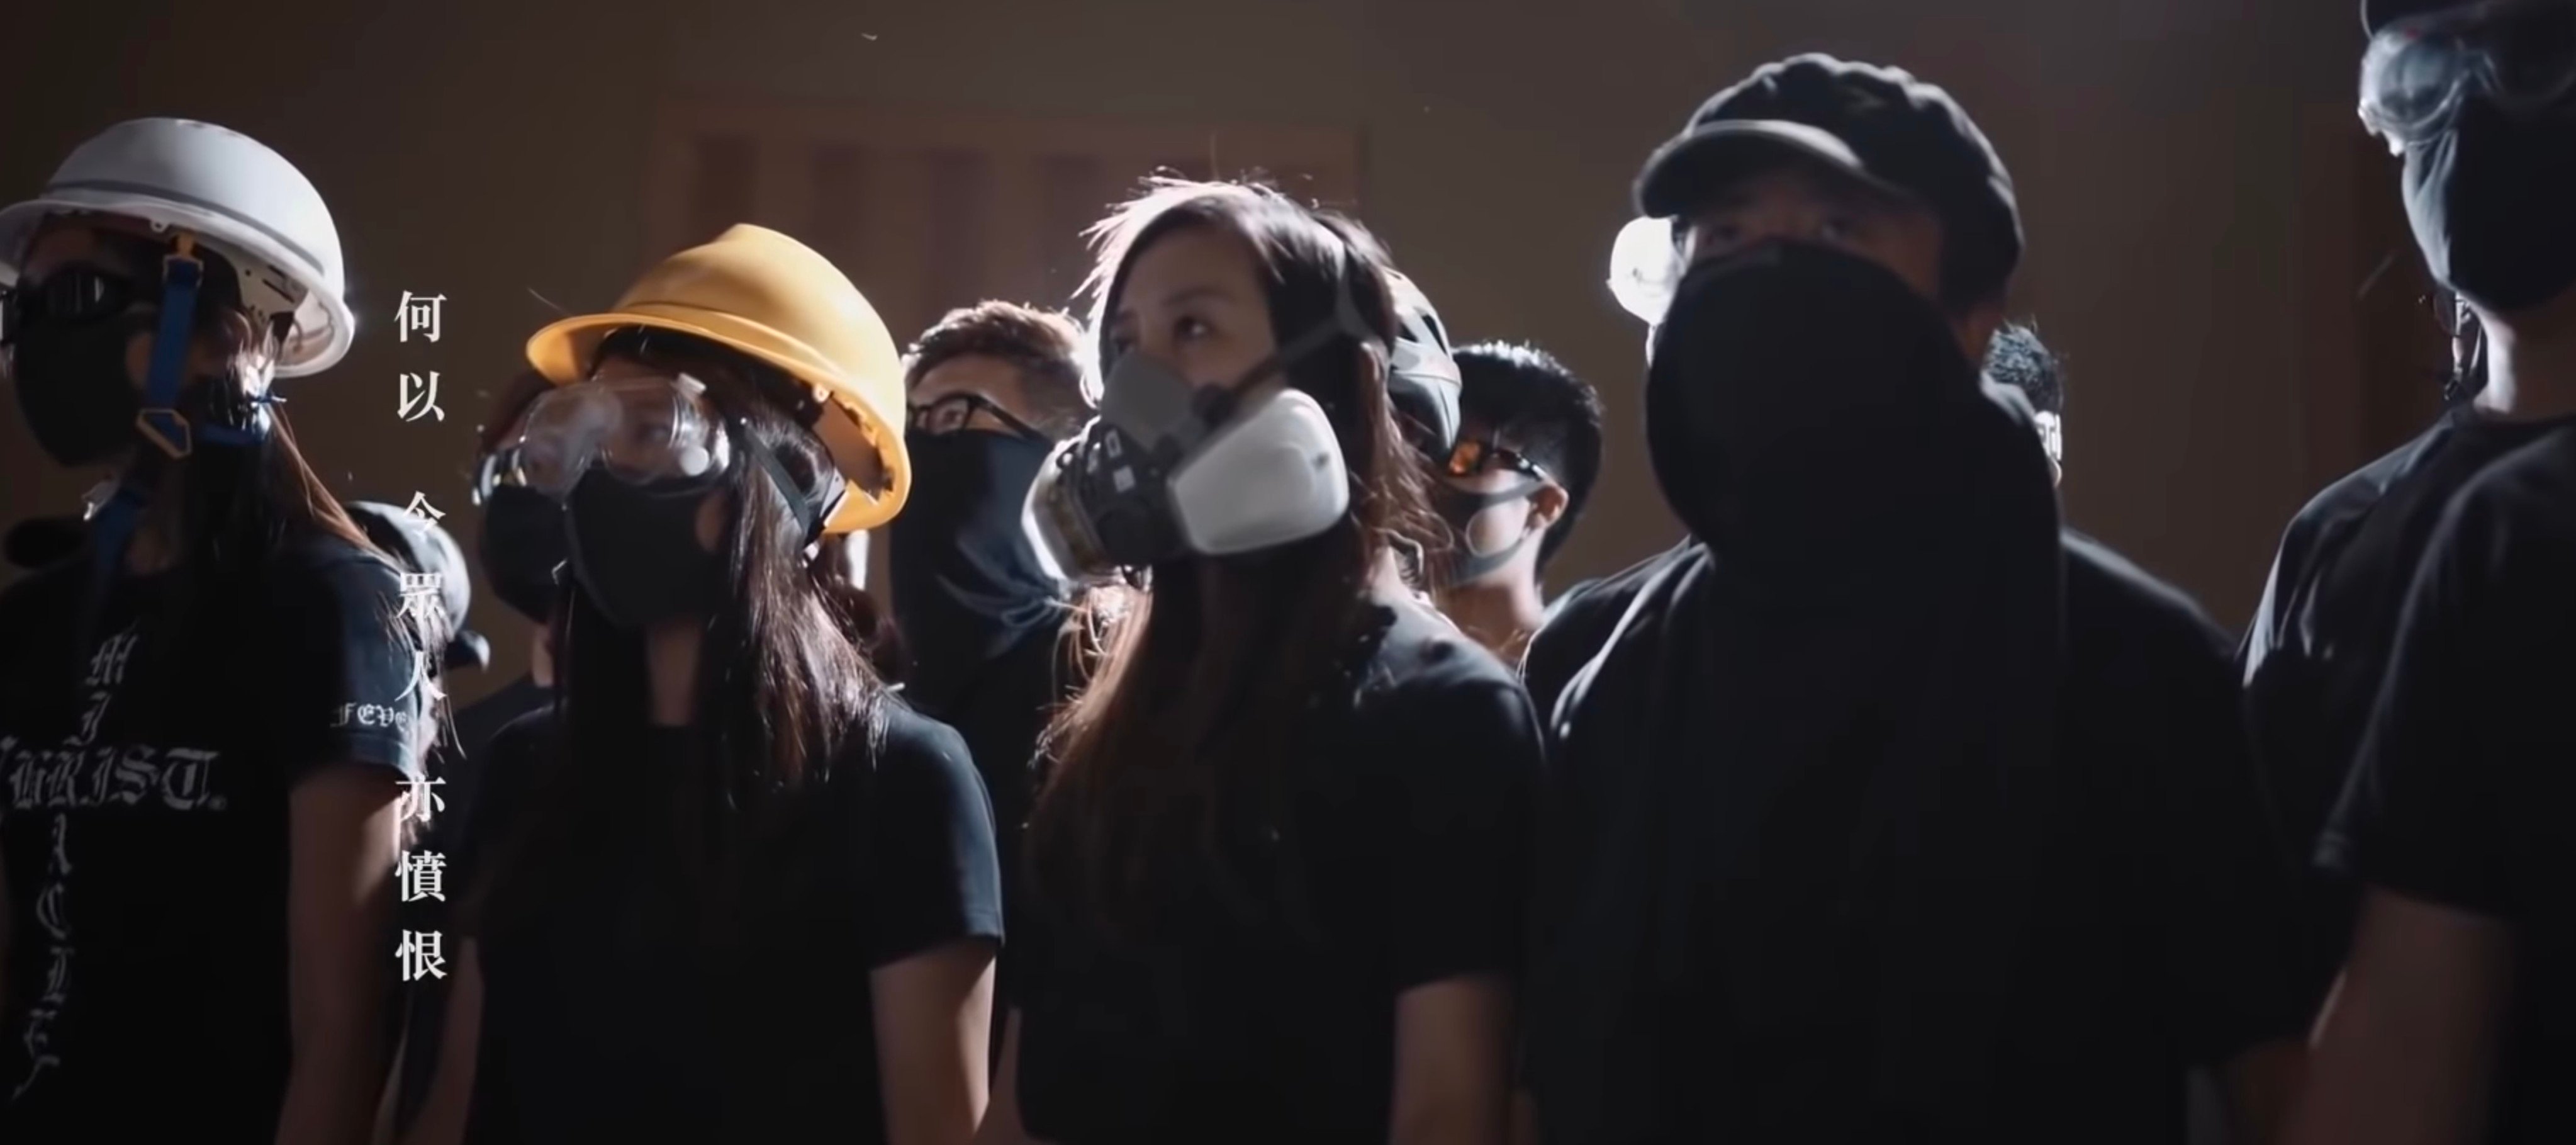 The protest song “Glory to Hong Kong” is now banned. Photo: YouTube